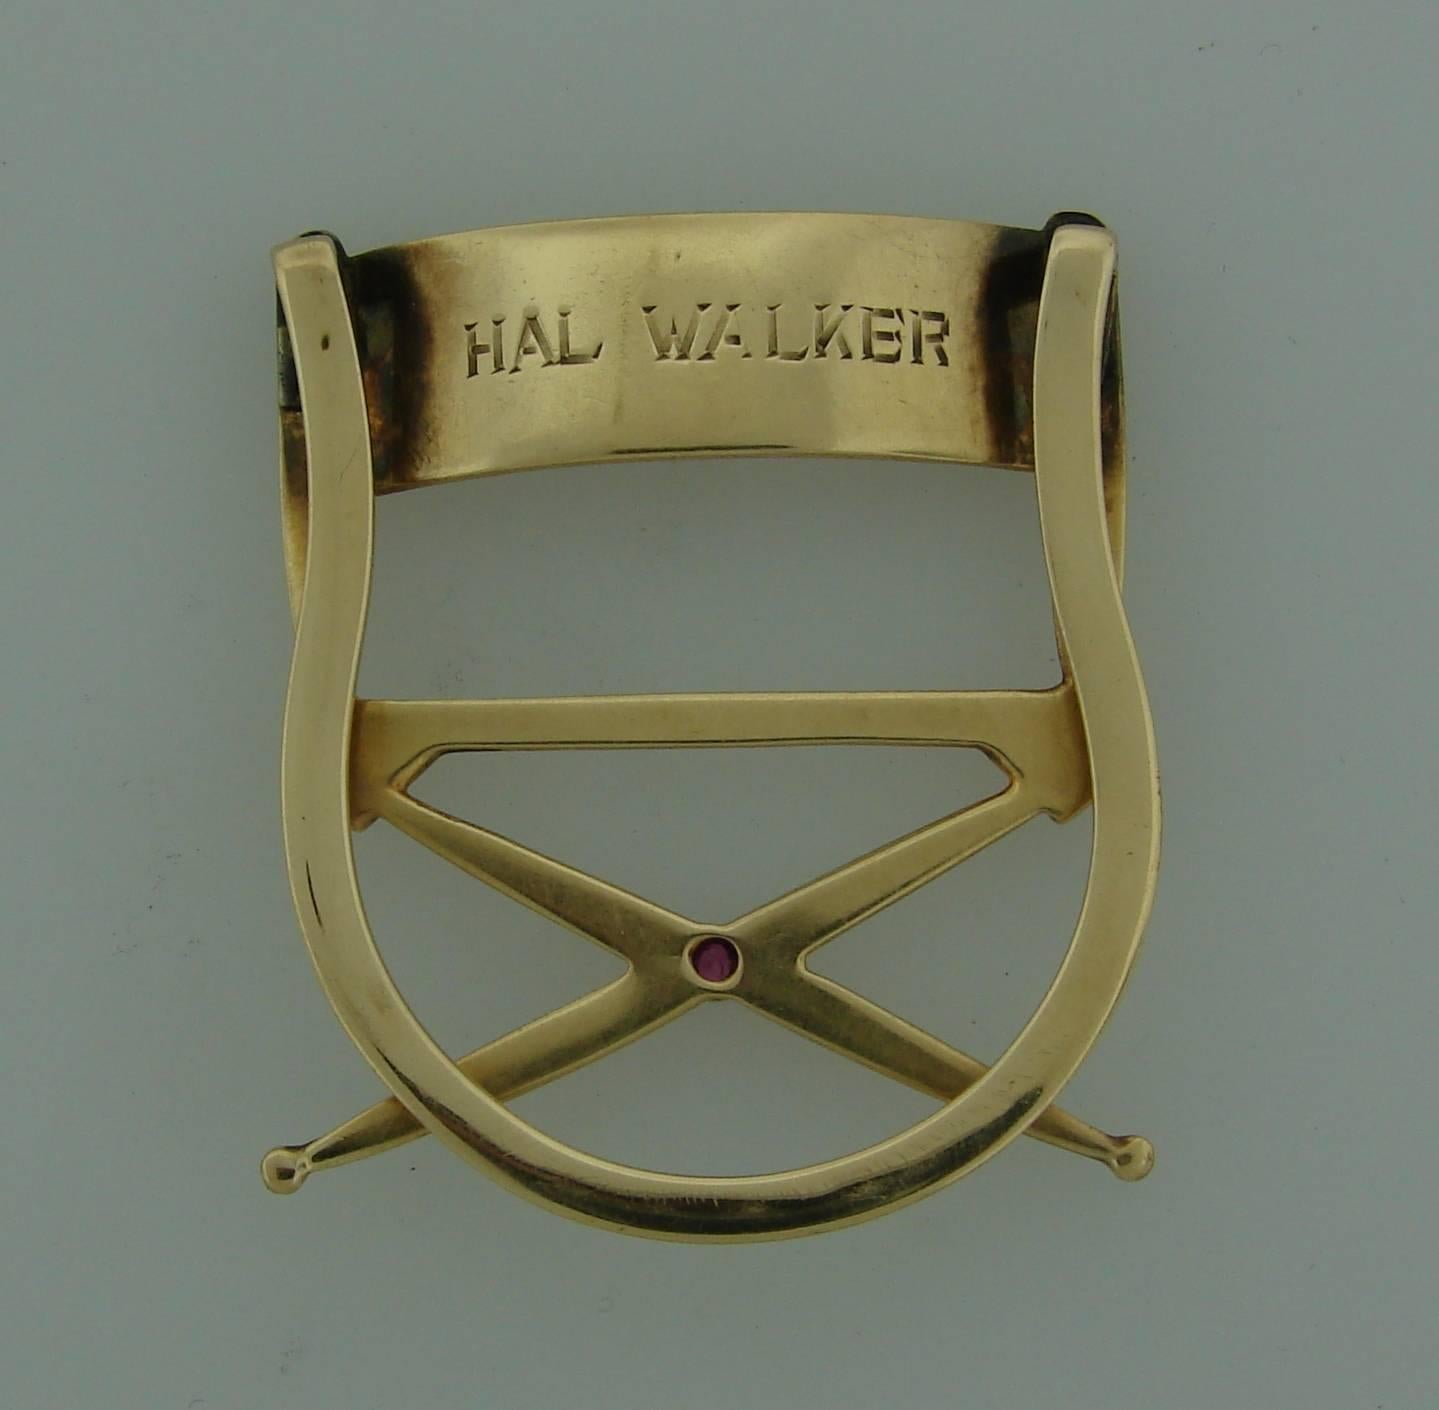 Unique money clip designed as a movie director chair. It was given to Hal Walker by Jerry Lewis who was known for doing some of the earliest Dean Martin and Jerry Lewis films such as At War with the Army and Sailor Beware and some with the team of